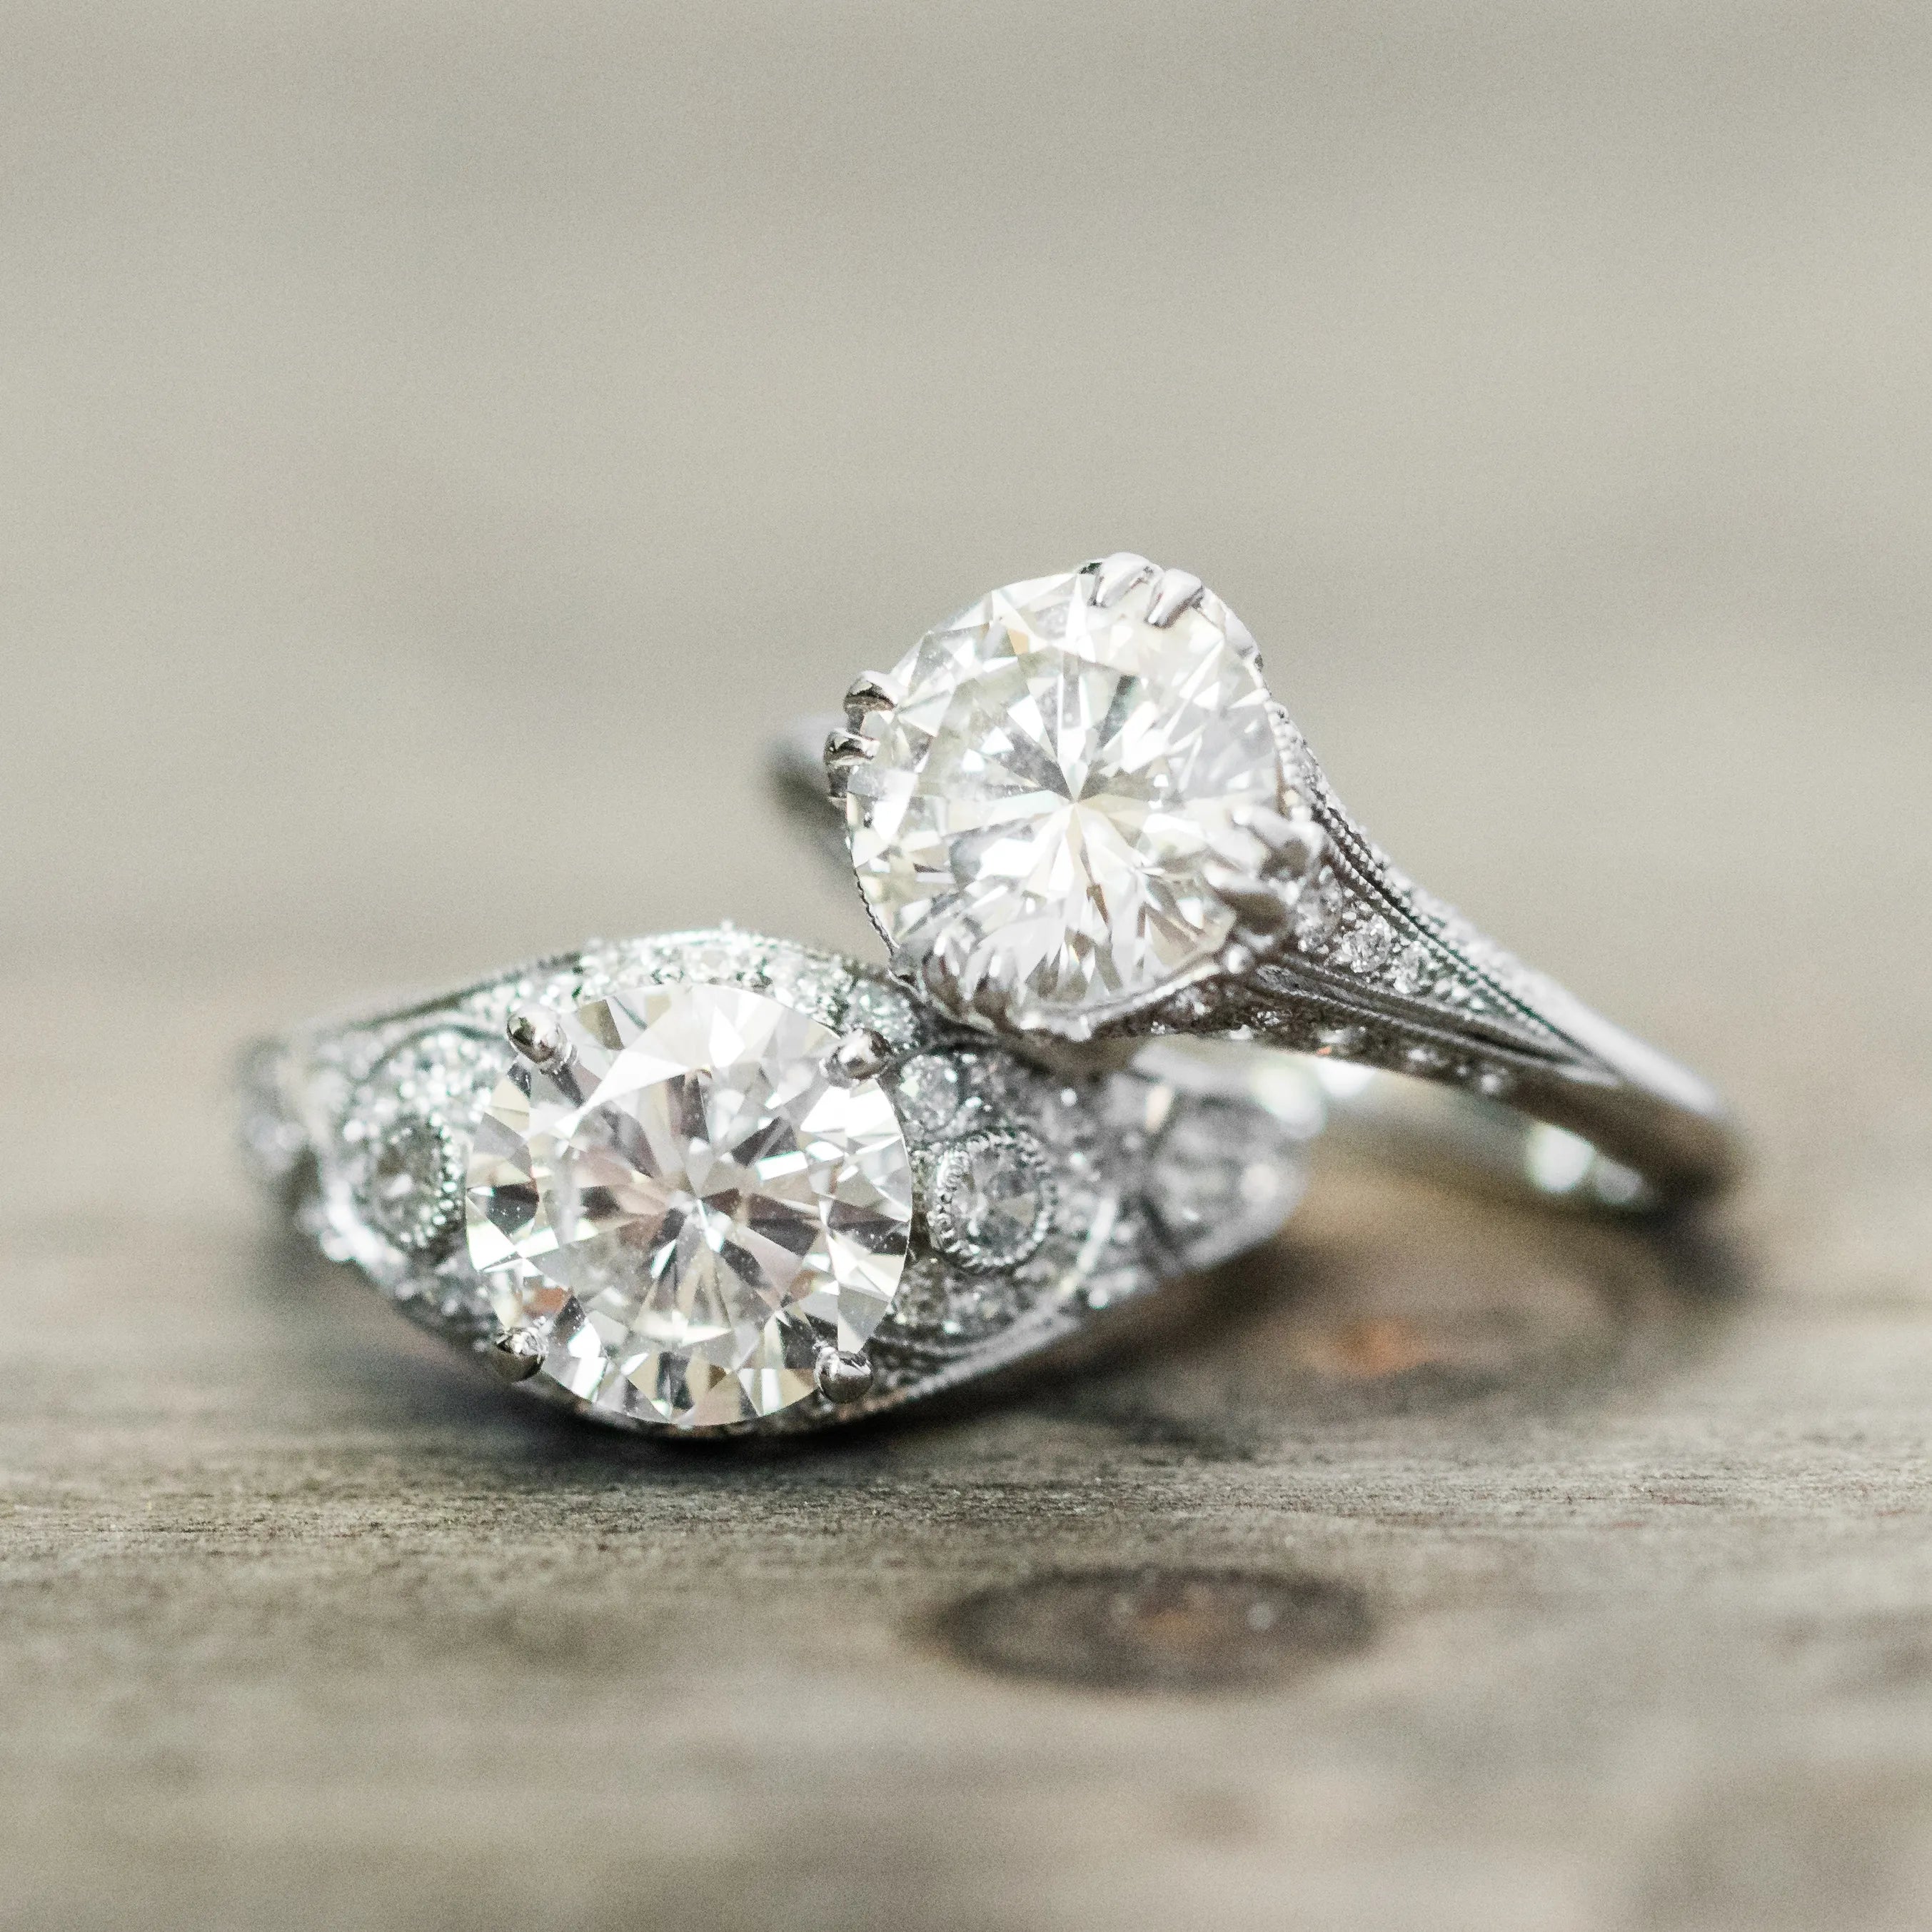 5 Engagement Ring Trends We Are Loving for 2019